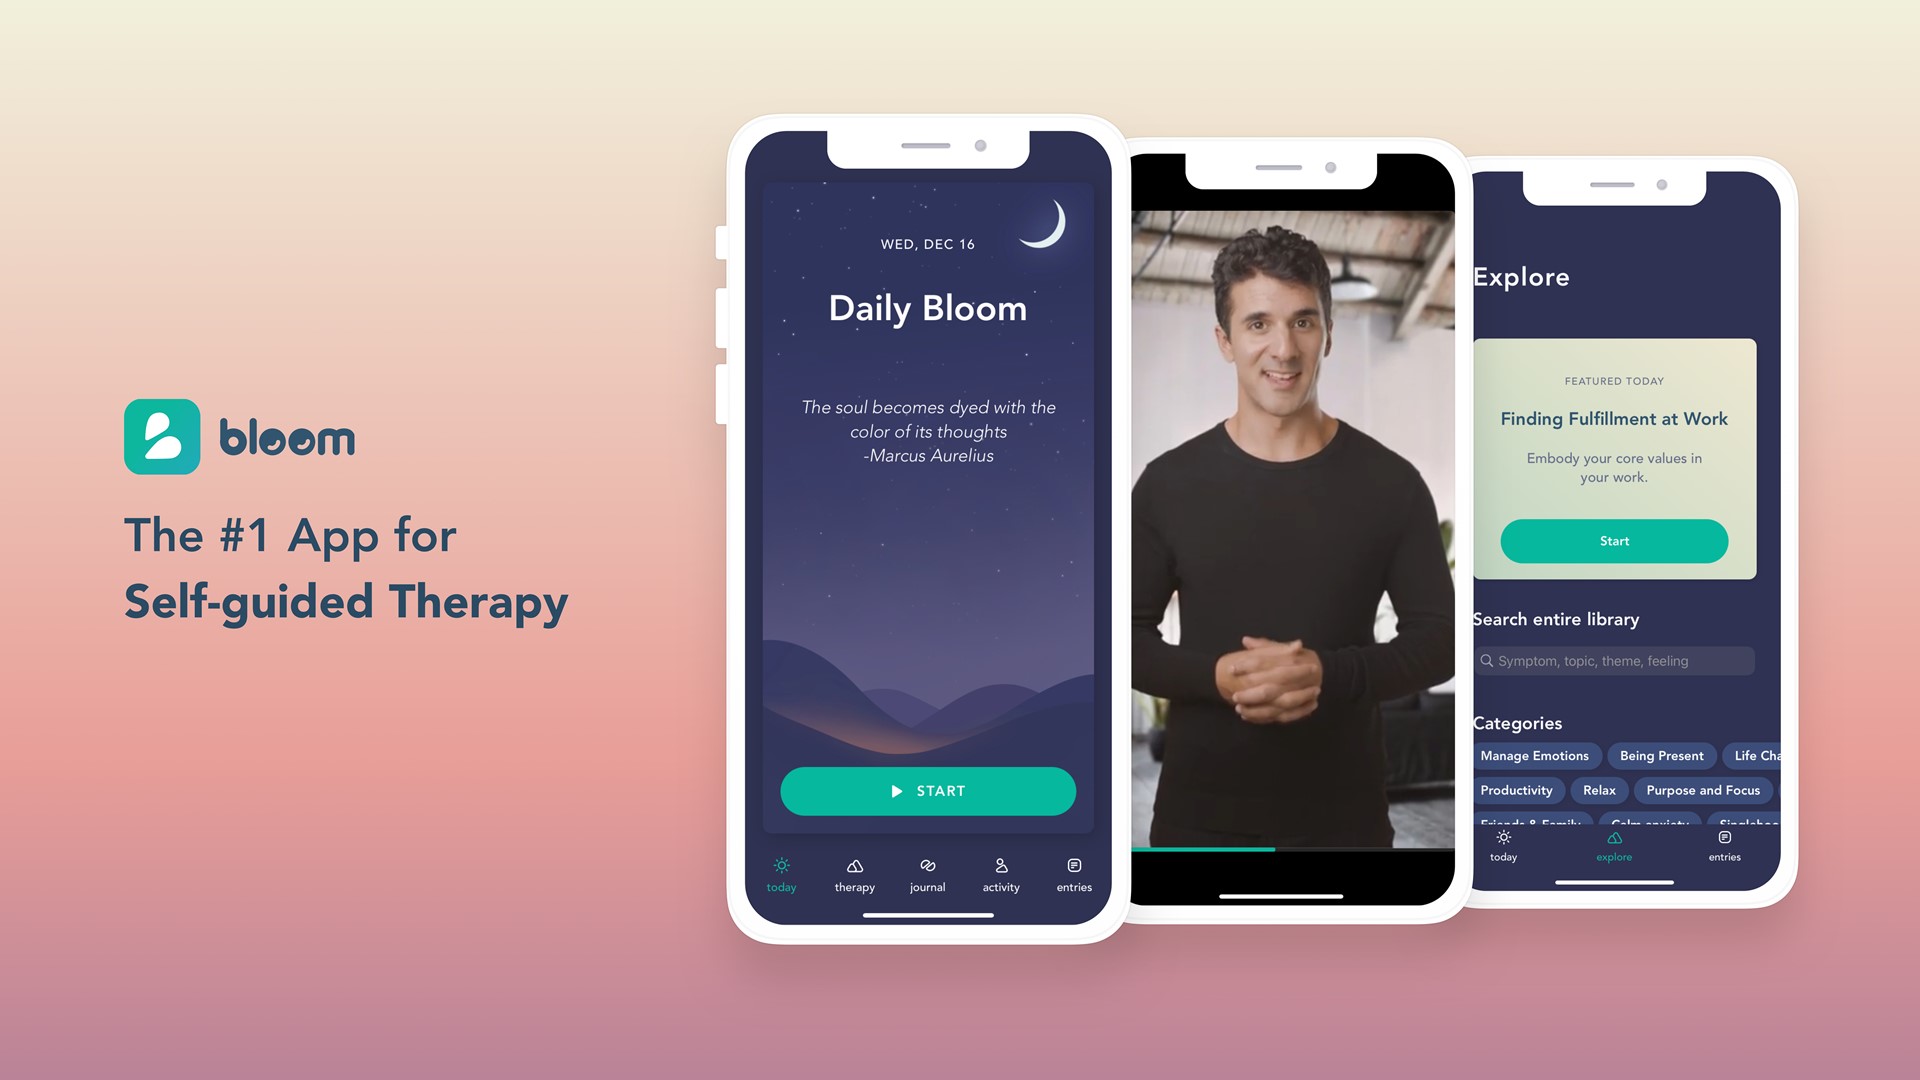 Mental health became a top priority during the pandemic, but getting help can be expensive and time consuming. Now, a new app is changing the way we do therapy.